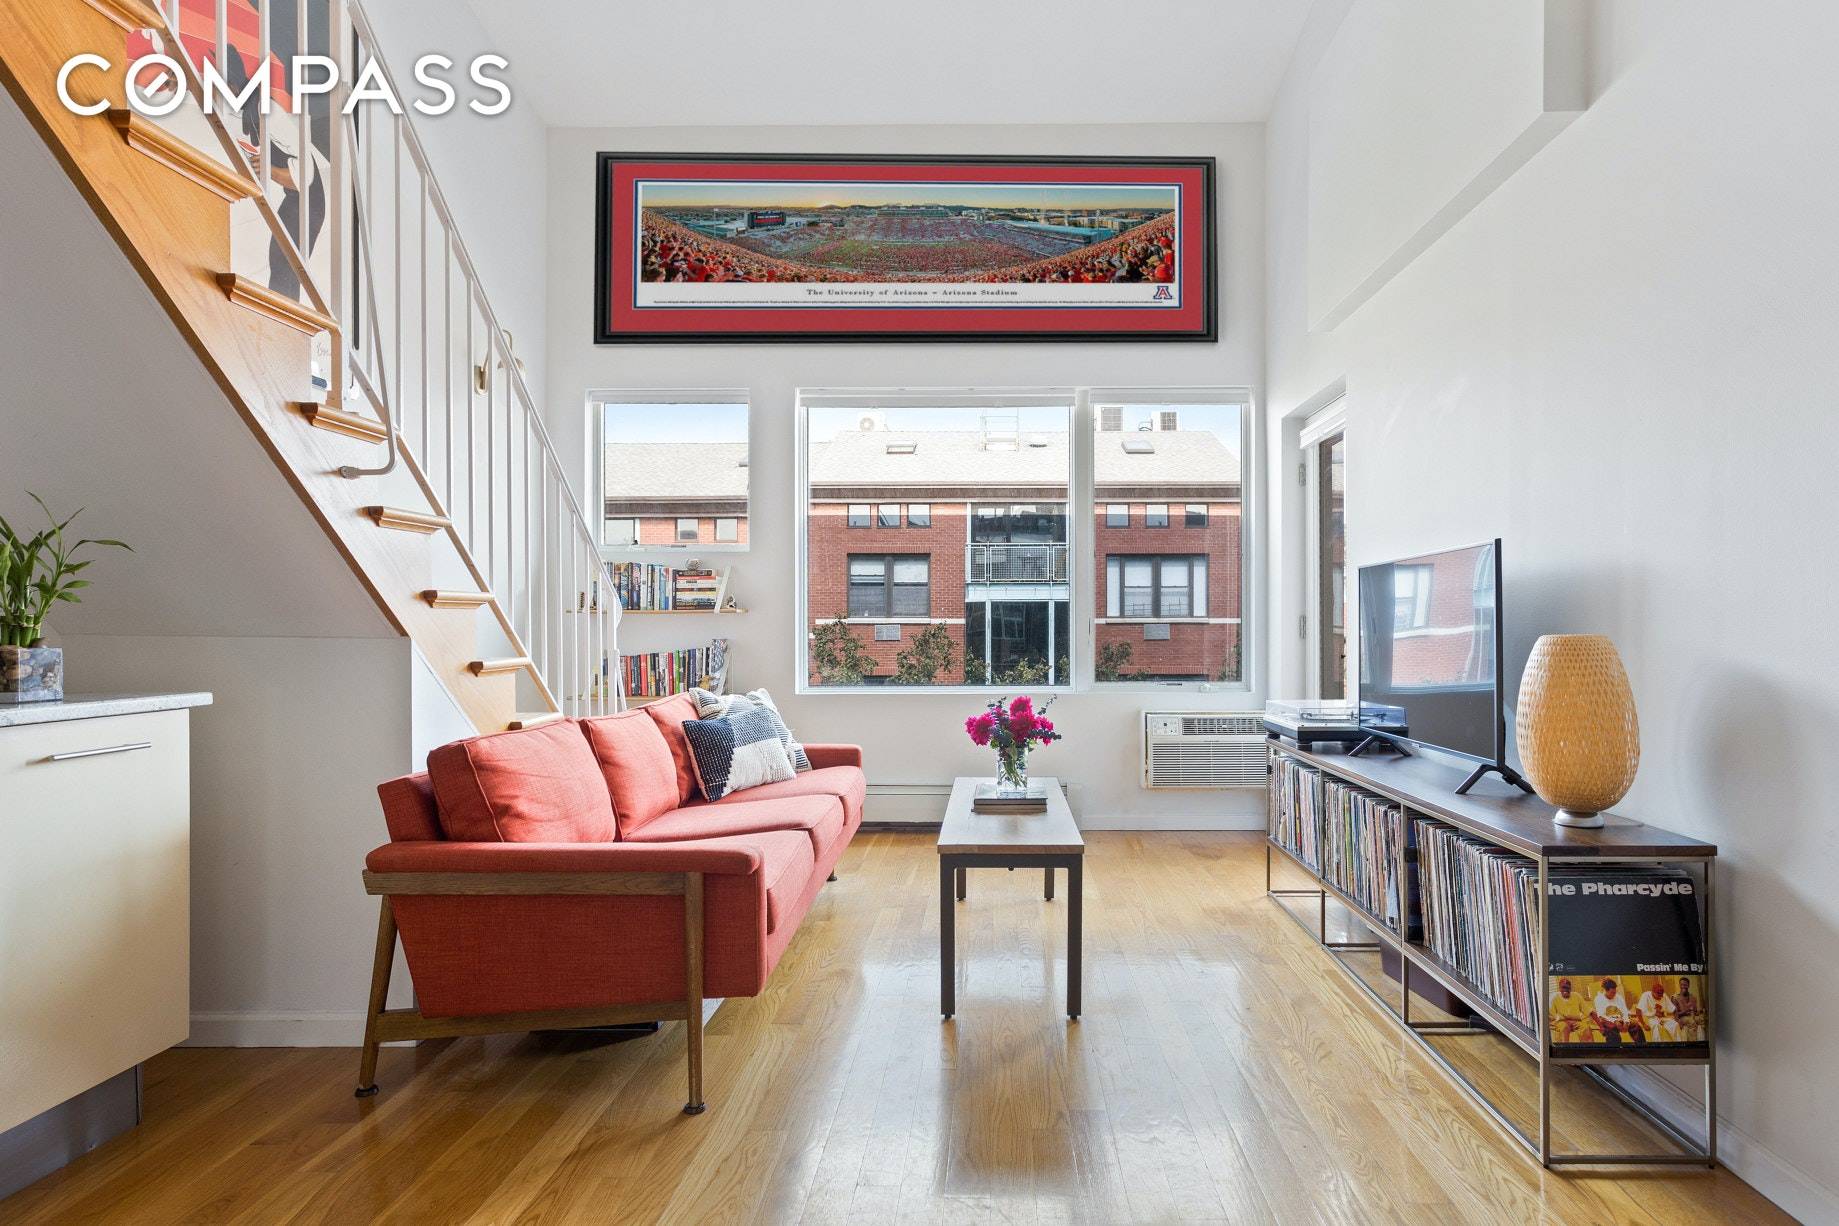 Welcome home to this bright and airy, top floor condo in the heart of vibrant and trendy South Park Slope.